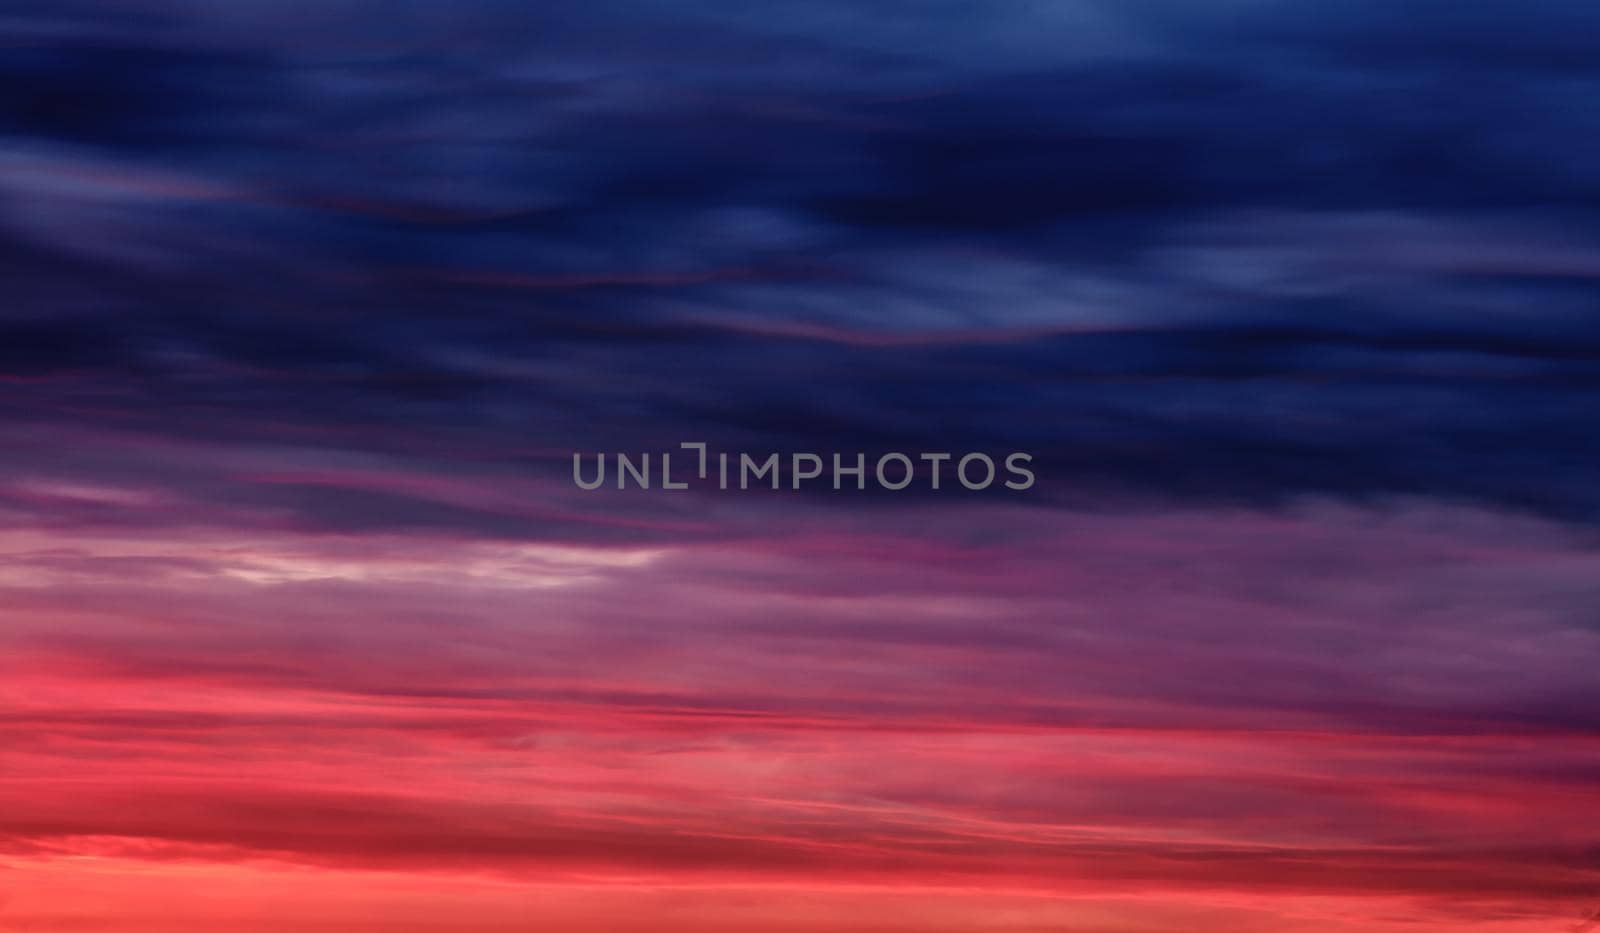 Colorful sunset with clouds in the evening. Abstract nature background. Dramatic and moody pink, purple and blue cloudy sunset sky.